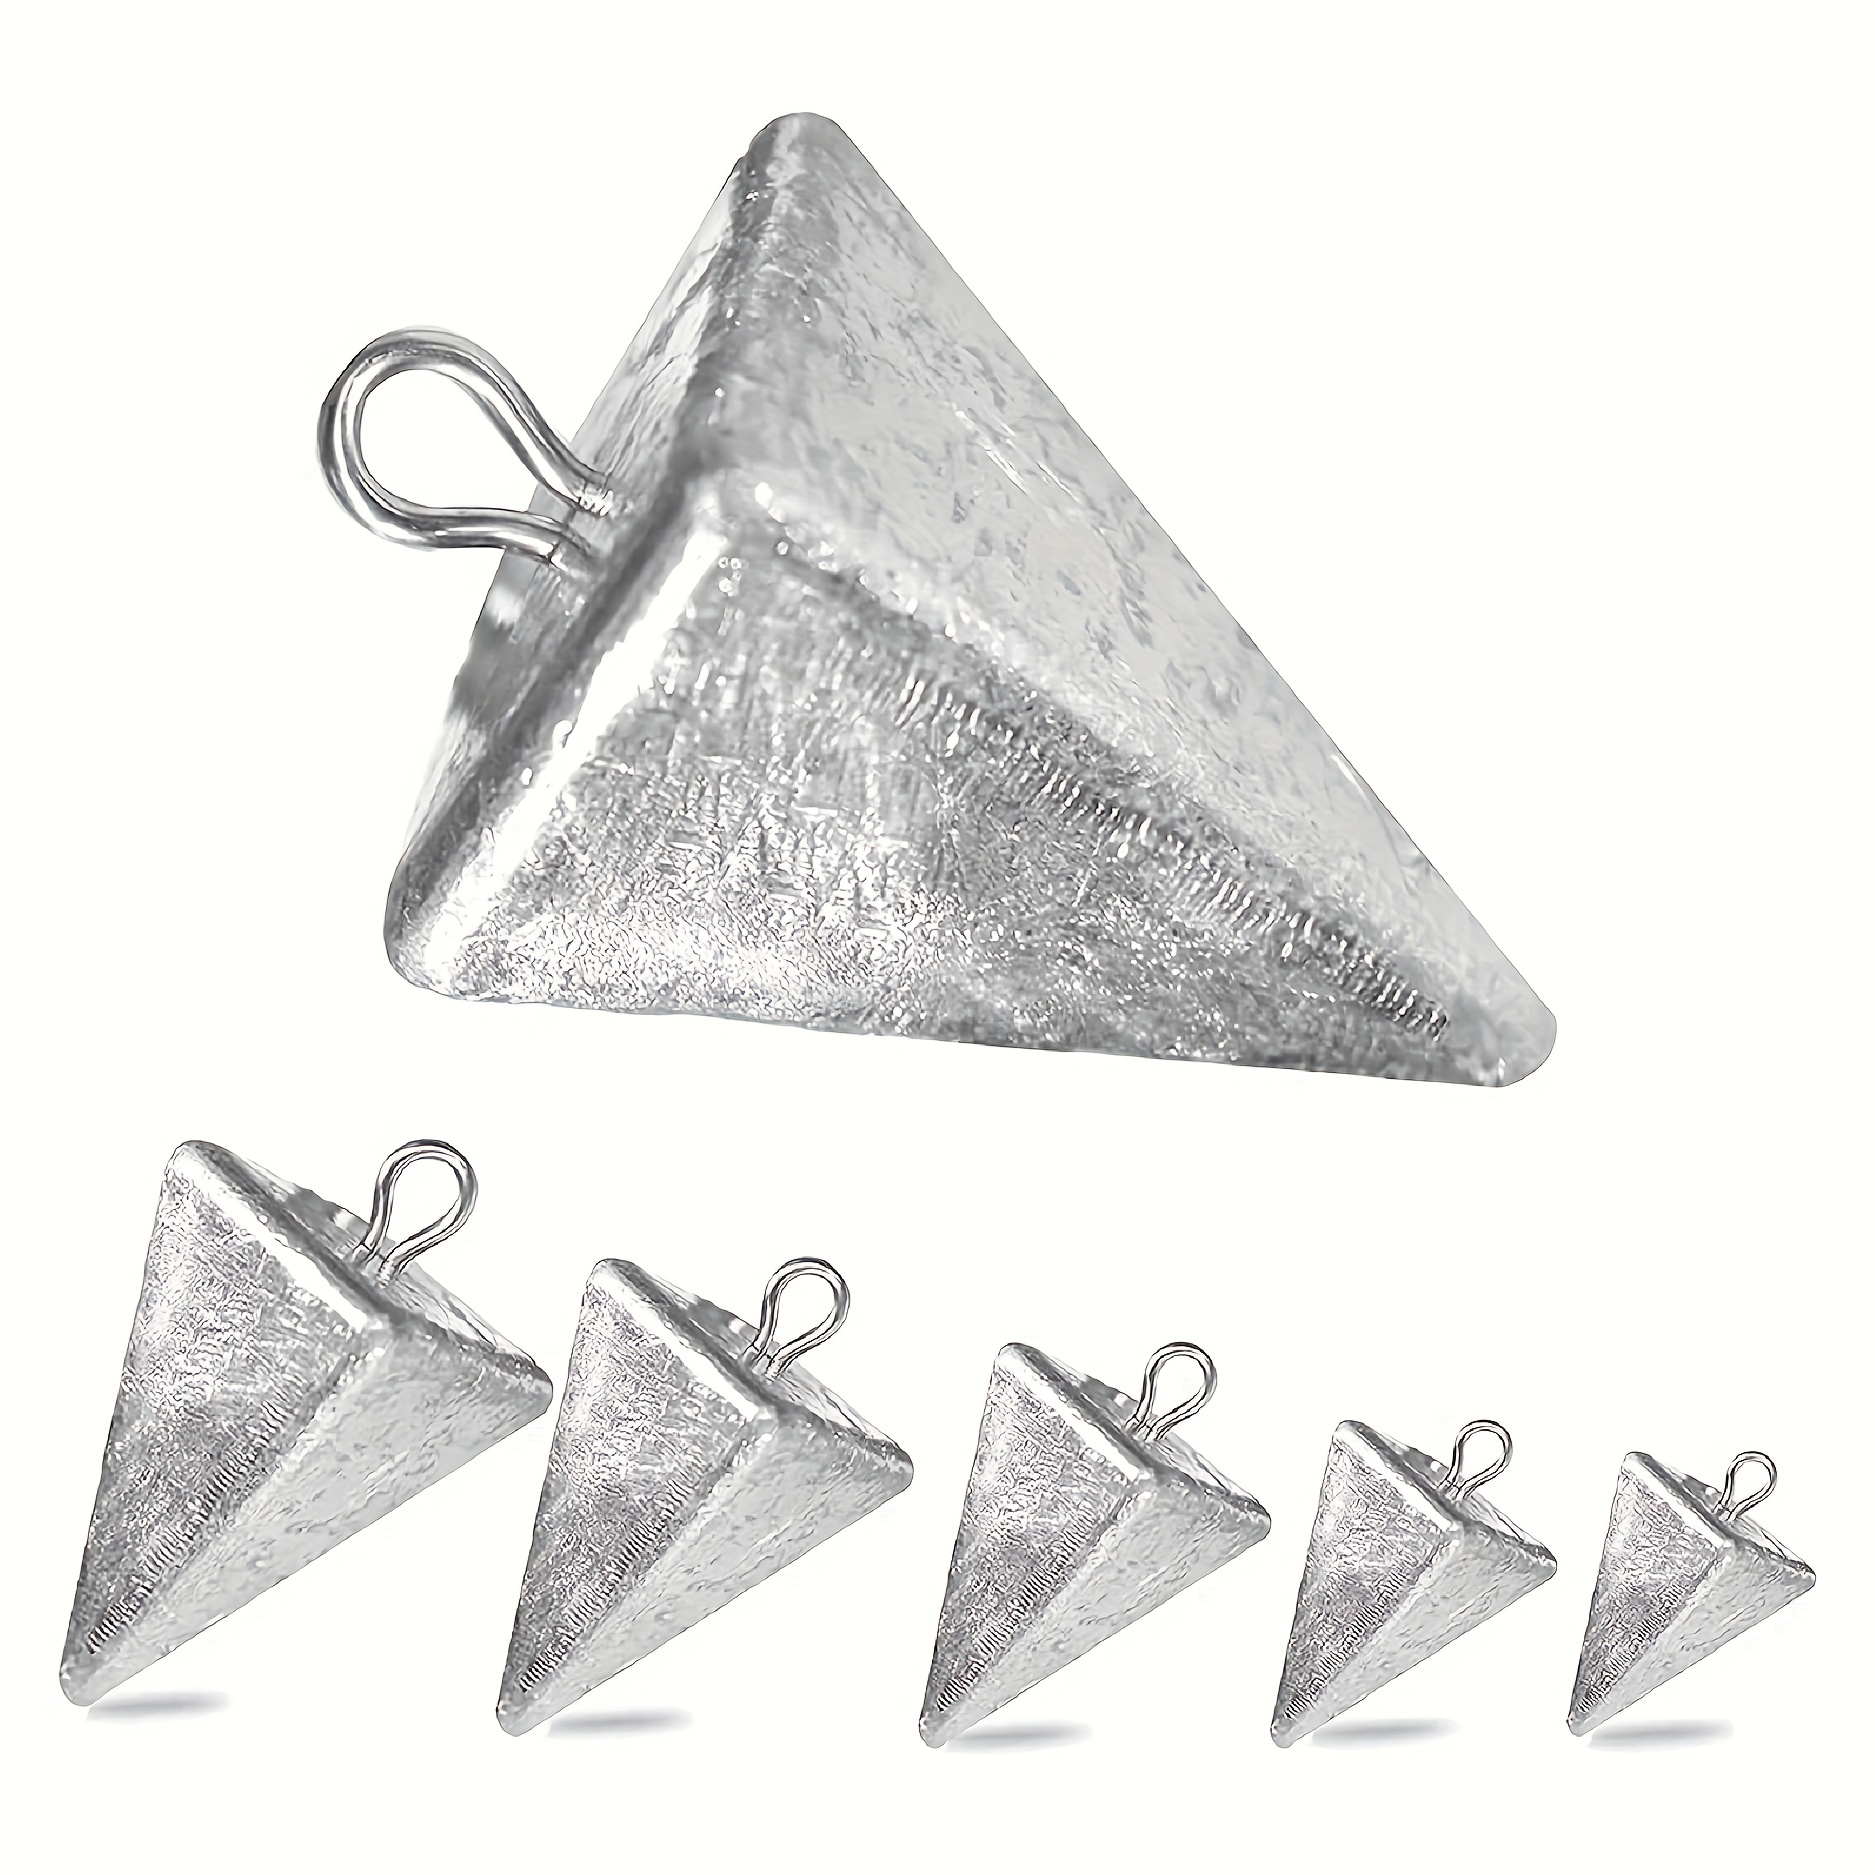 Pyramid Sinkers Fishing Weights,Fishing Sinker for Saltwater Fishing Surf  Gear Tackle 1oz-4pcs